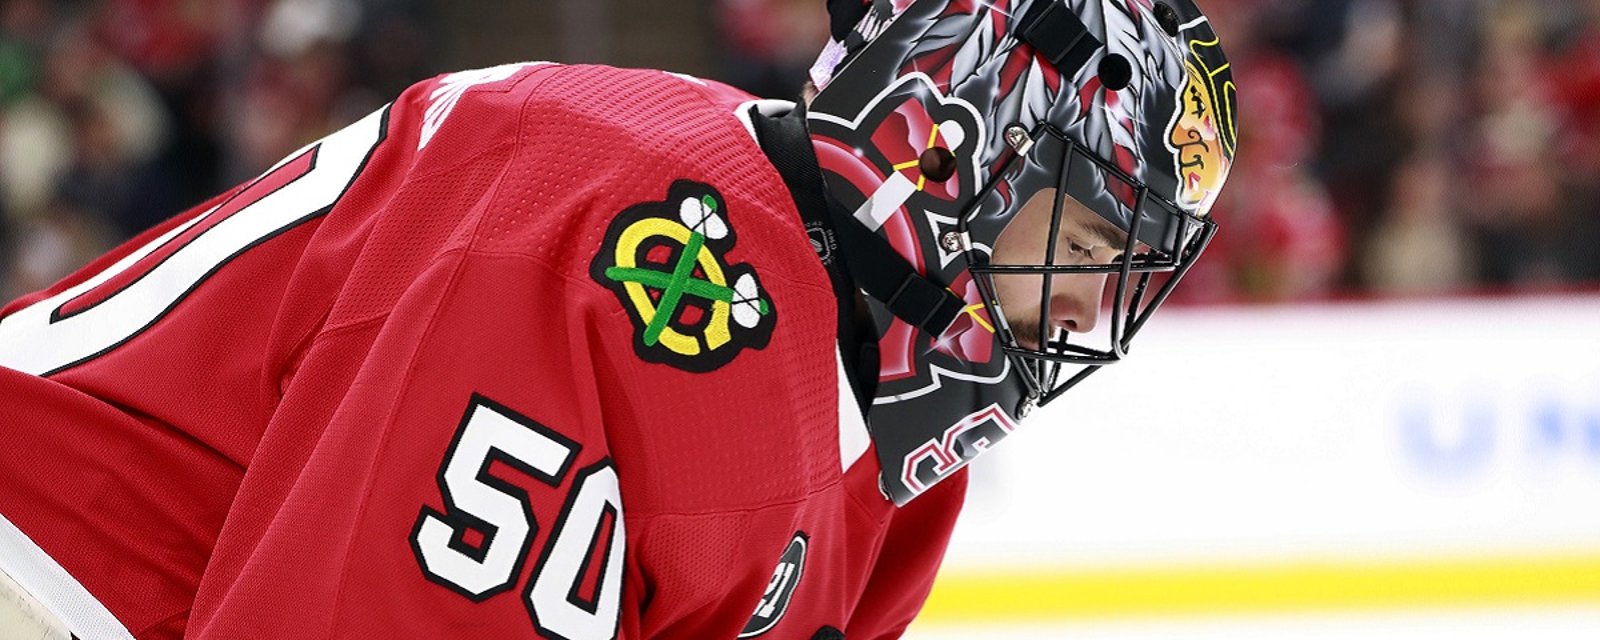 Rumor: Corey Crawford is done in Chicago.